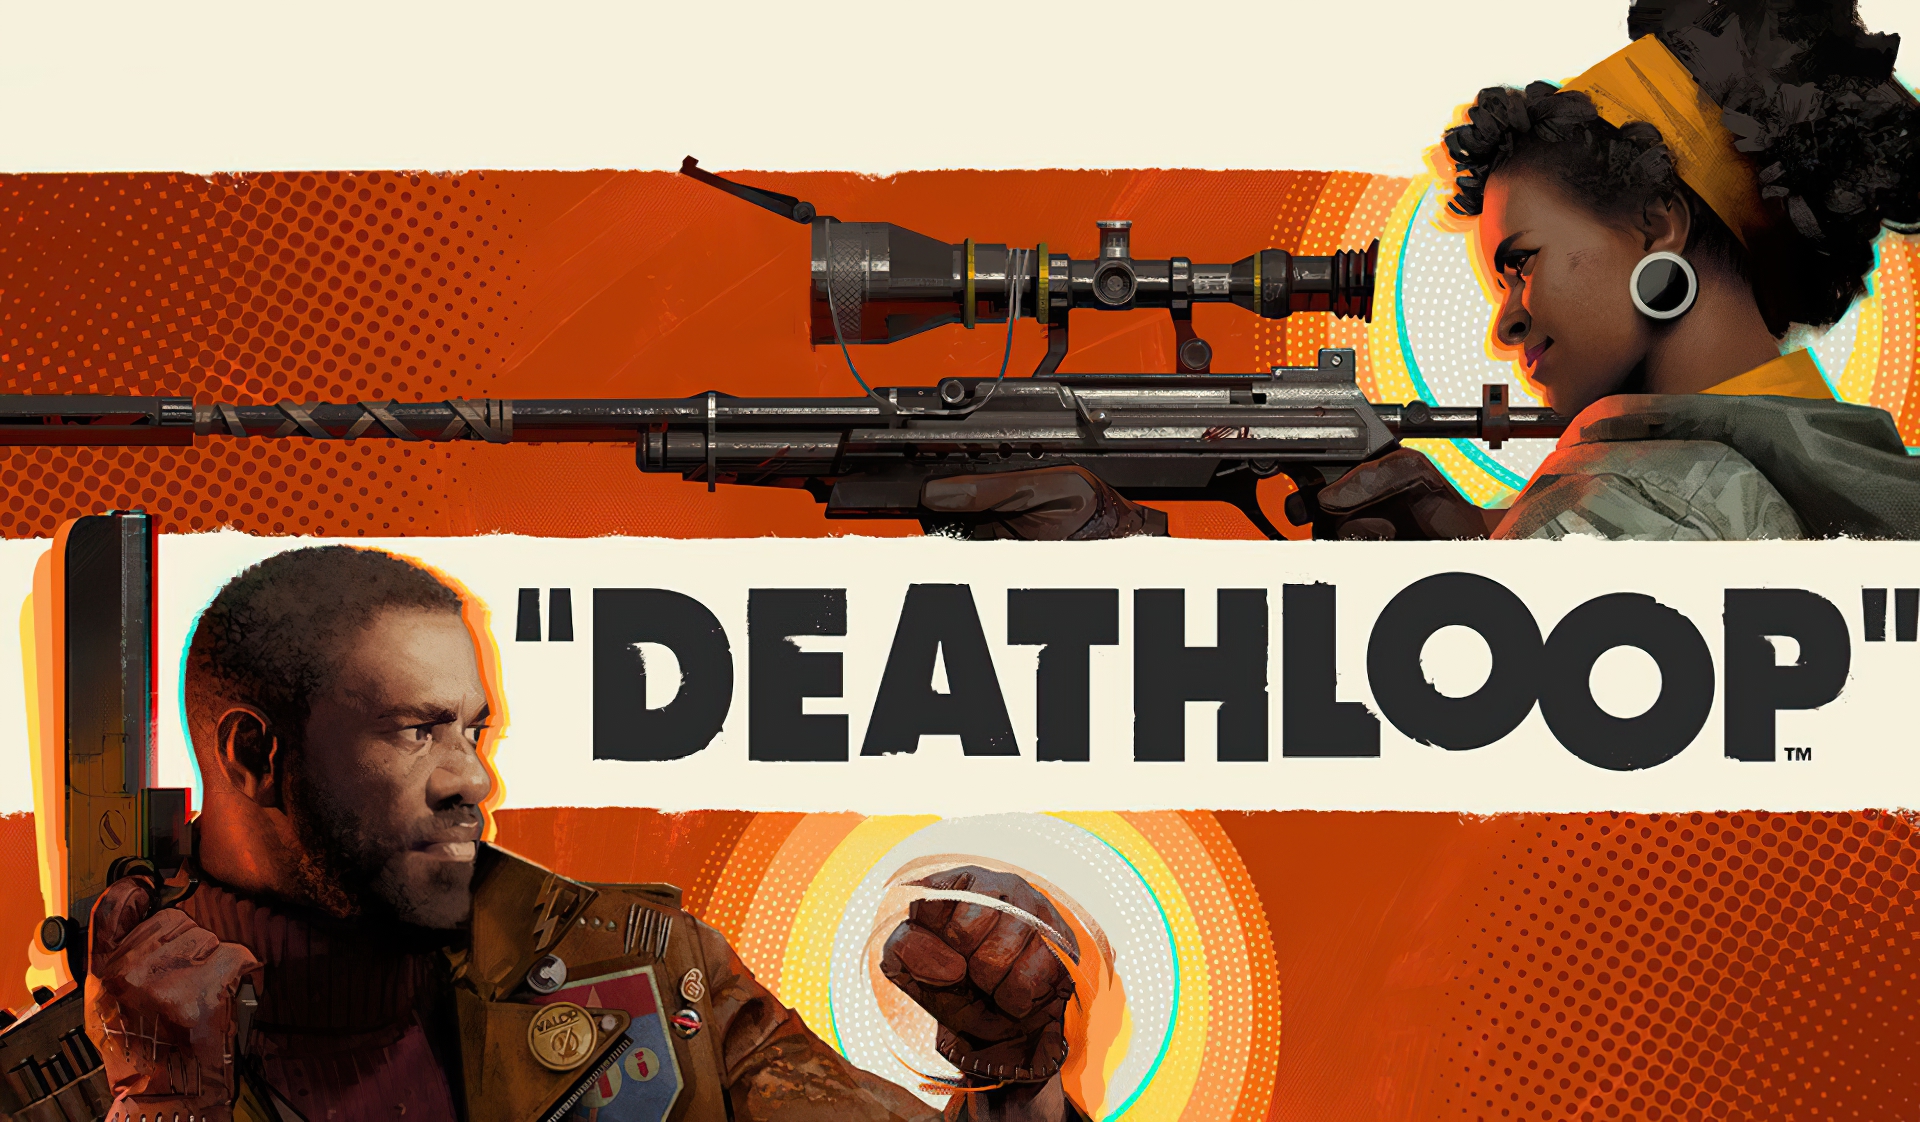 DEATHLOOP Available Now For Playstation 5 & PC